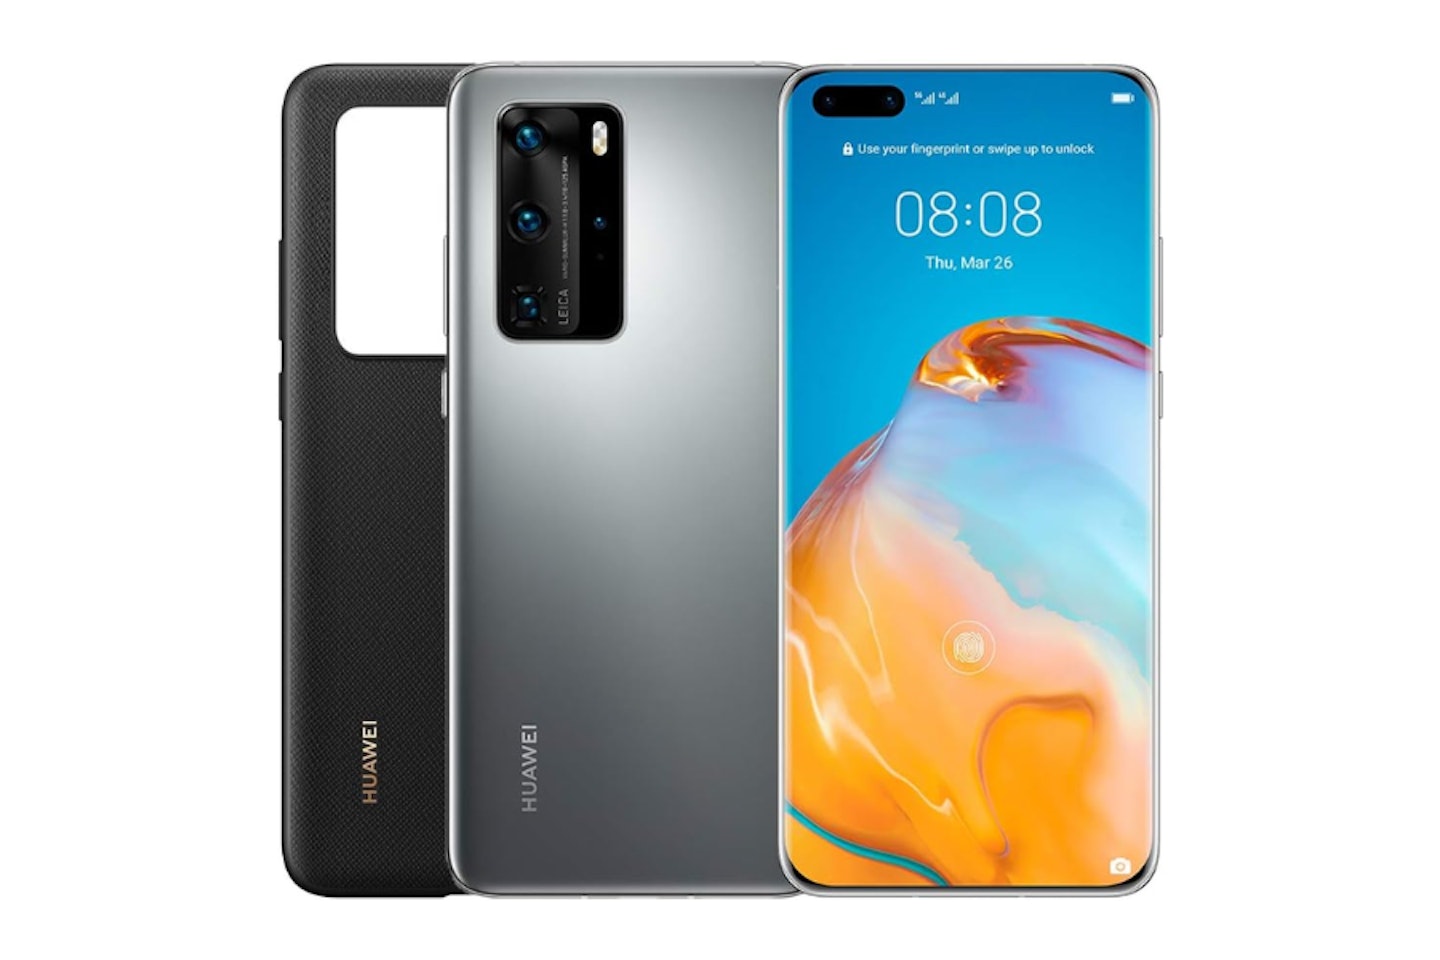 HUAWEI P40 Pro 256 GB - one of the best smartphones for photography